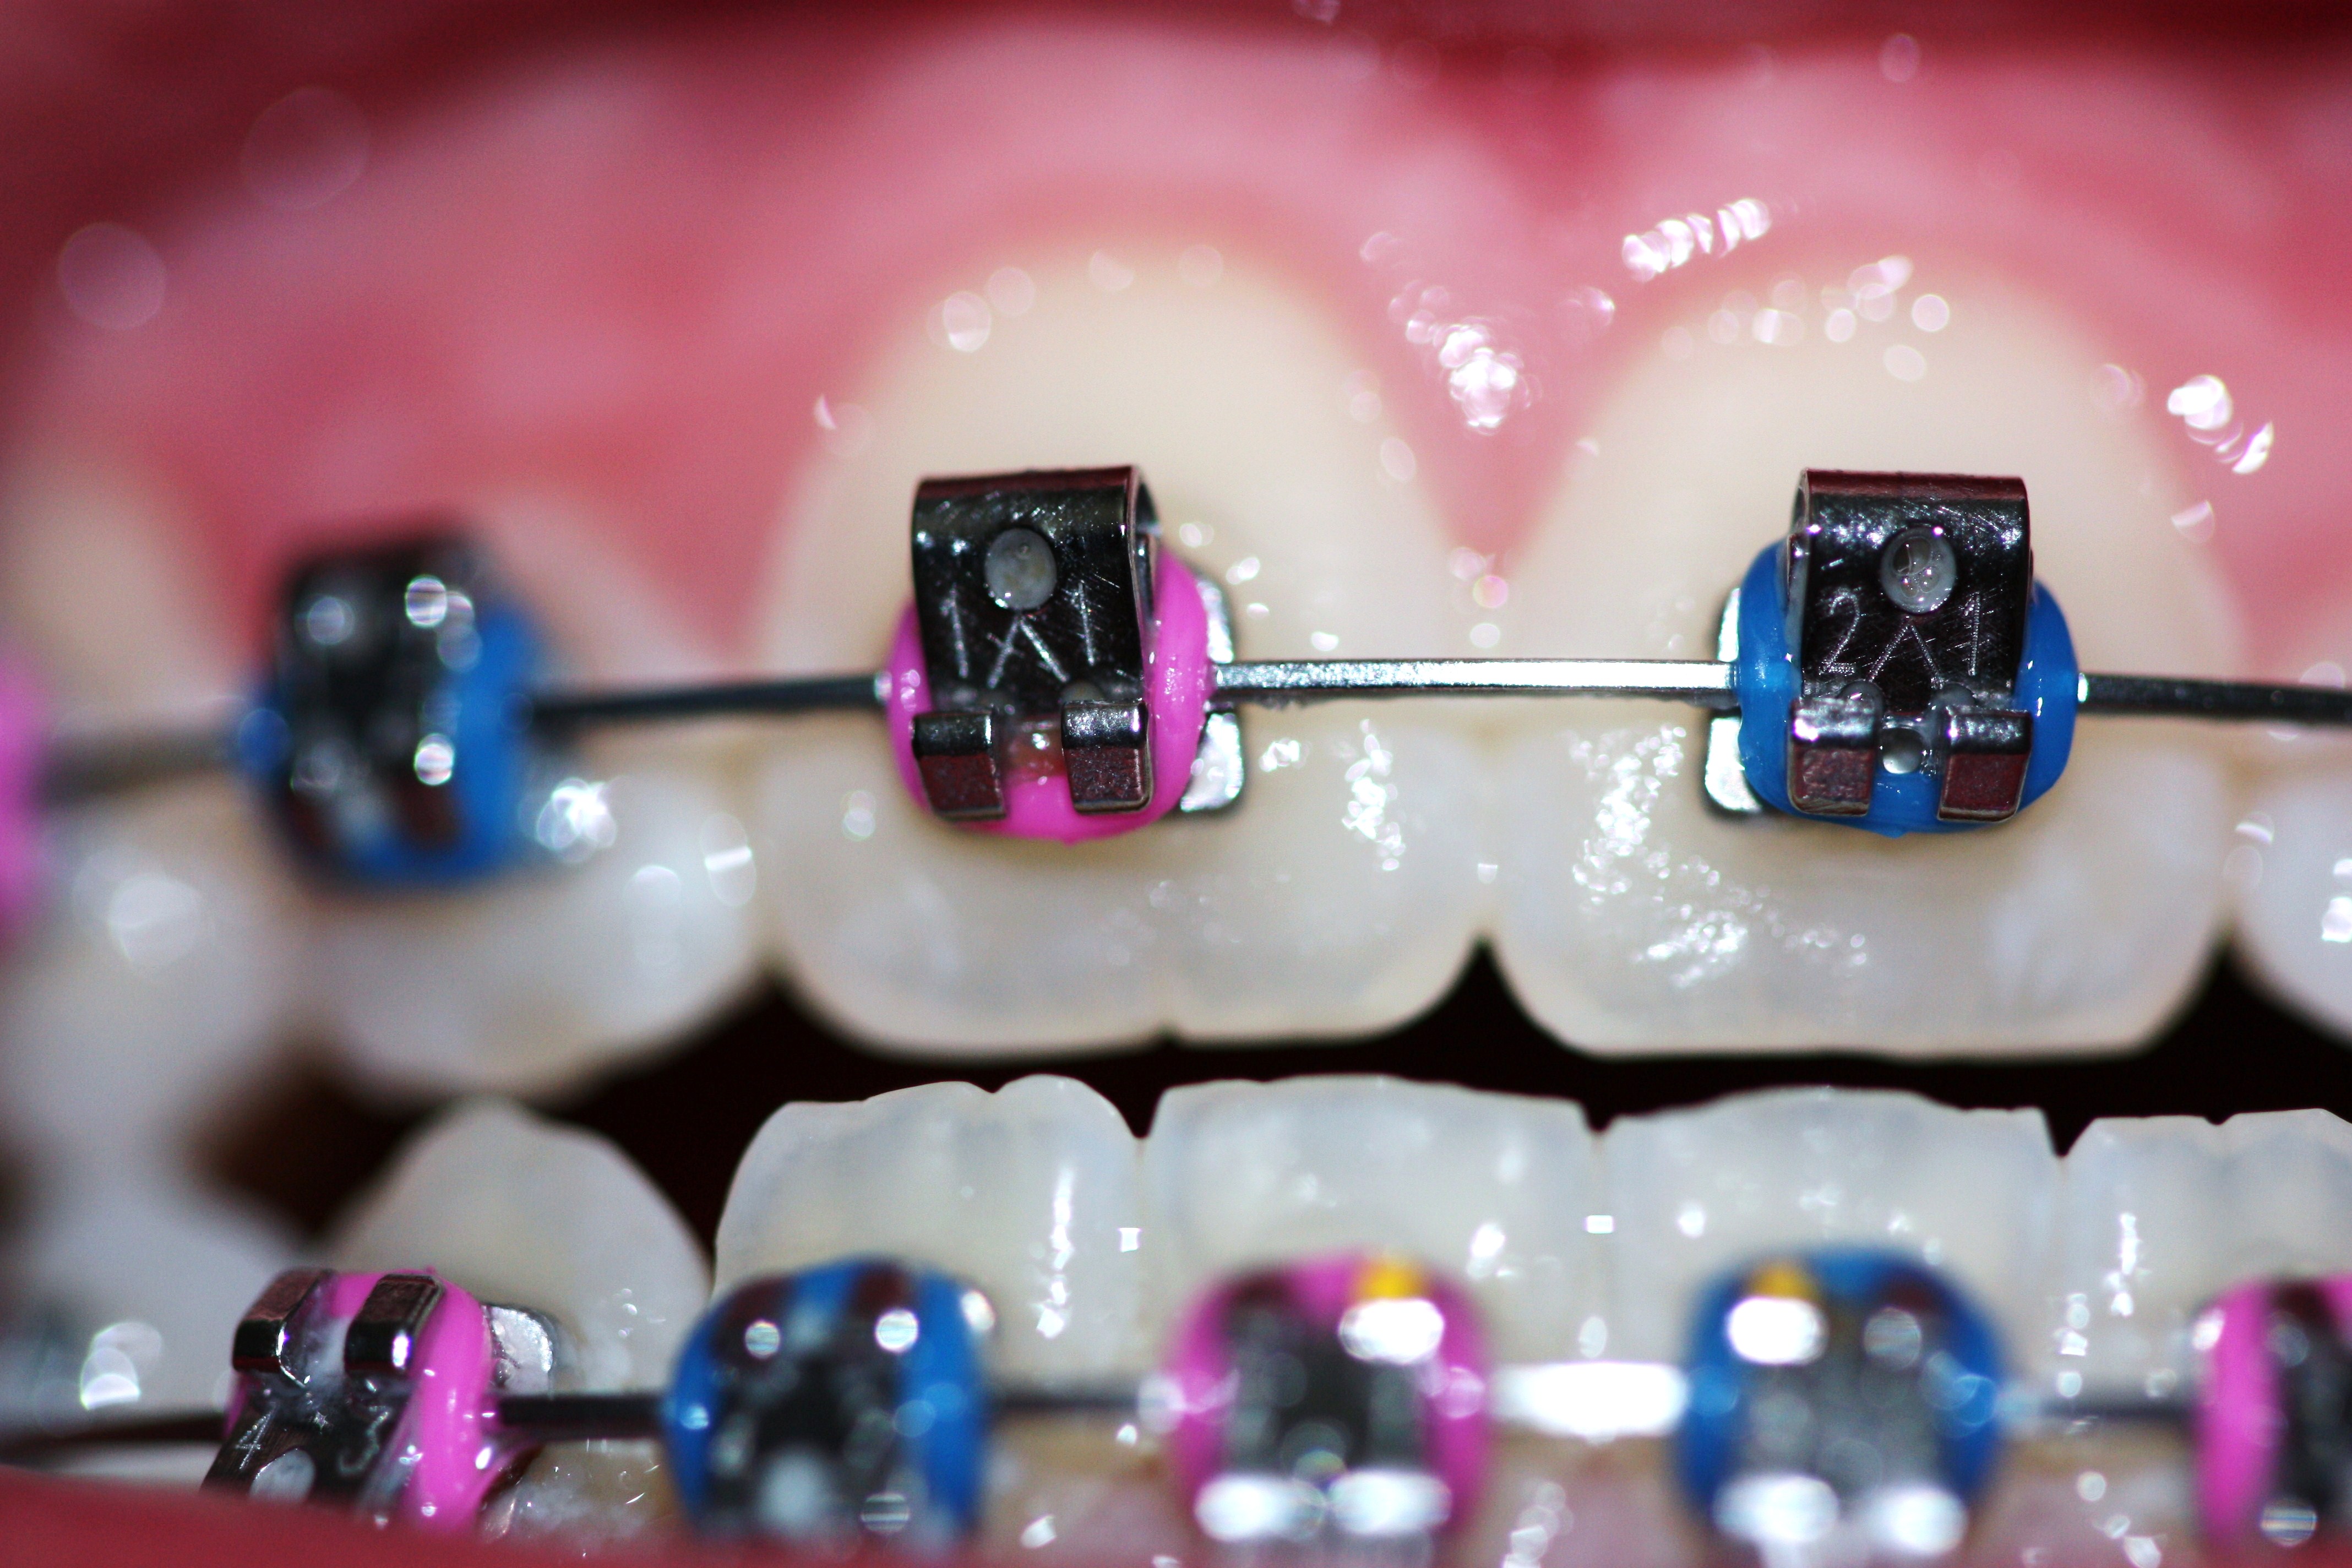 Wallpaper, flickr, flickrcolors, blue, pink, braces, braceface, orthodontics, catchycolorsflickrish, flickrland, fl imperfections, macromondays, silver, msh msh teeth, teef, orthodontia, metalmouth 4272x2848 - Wallpaper